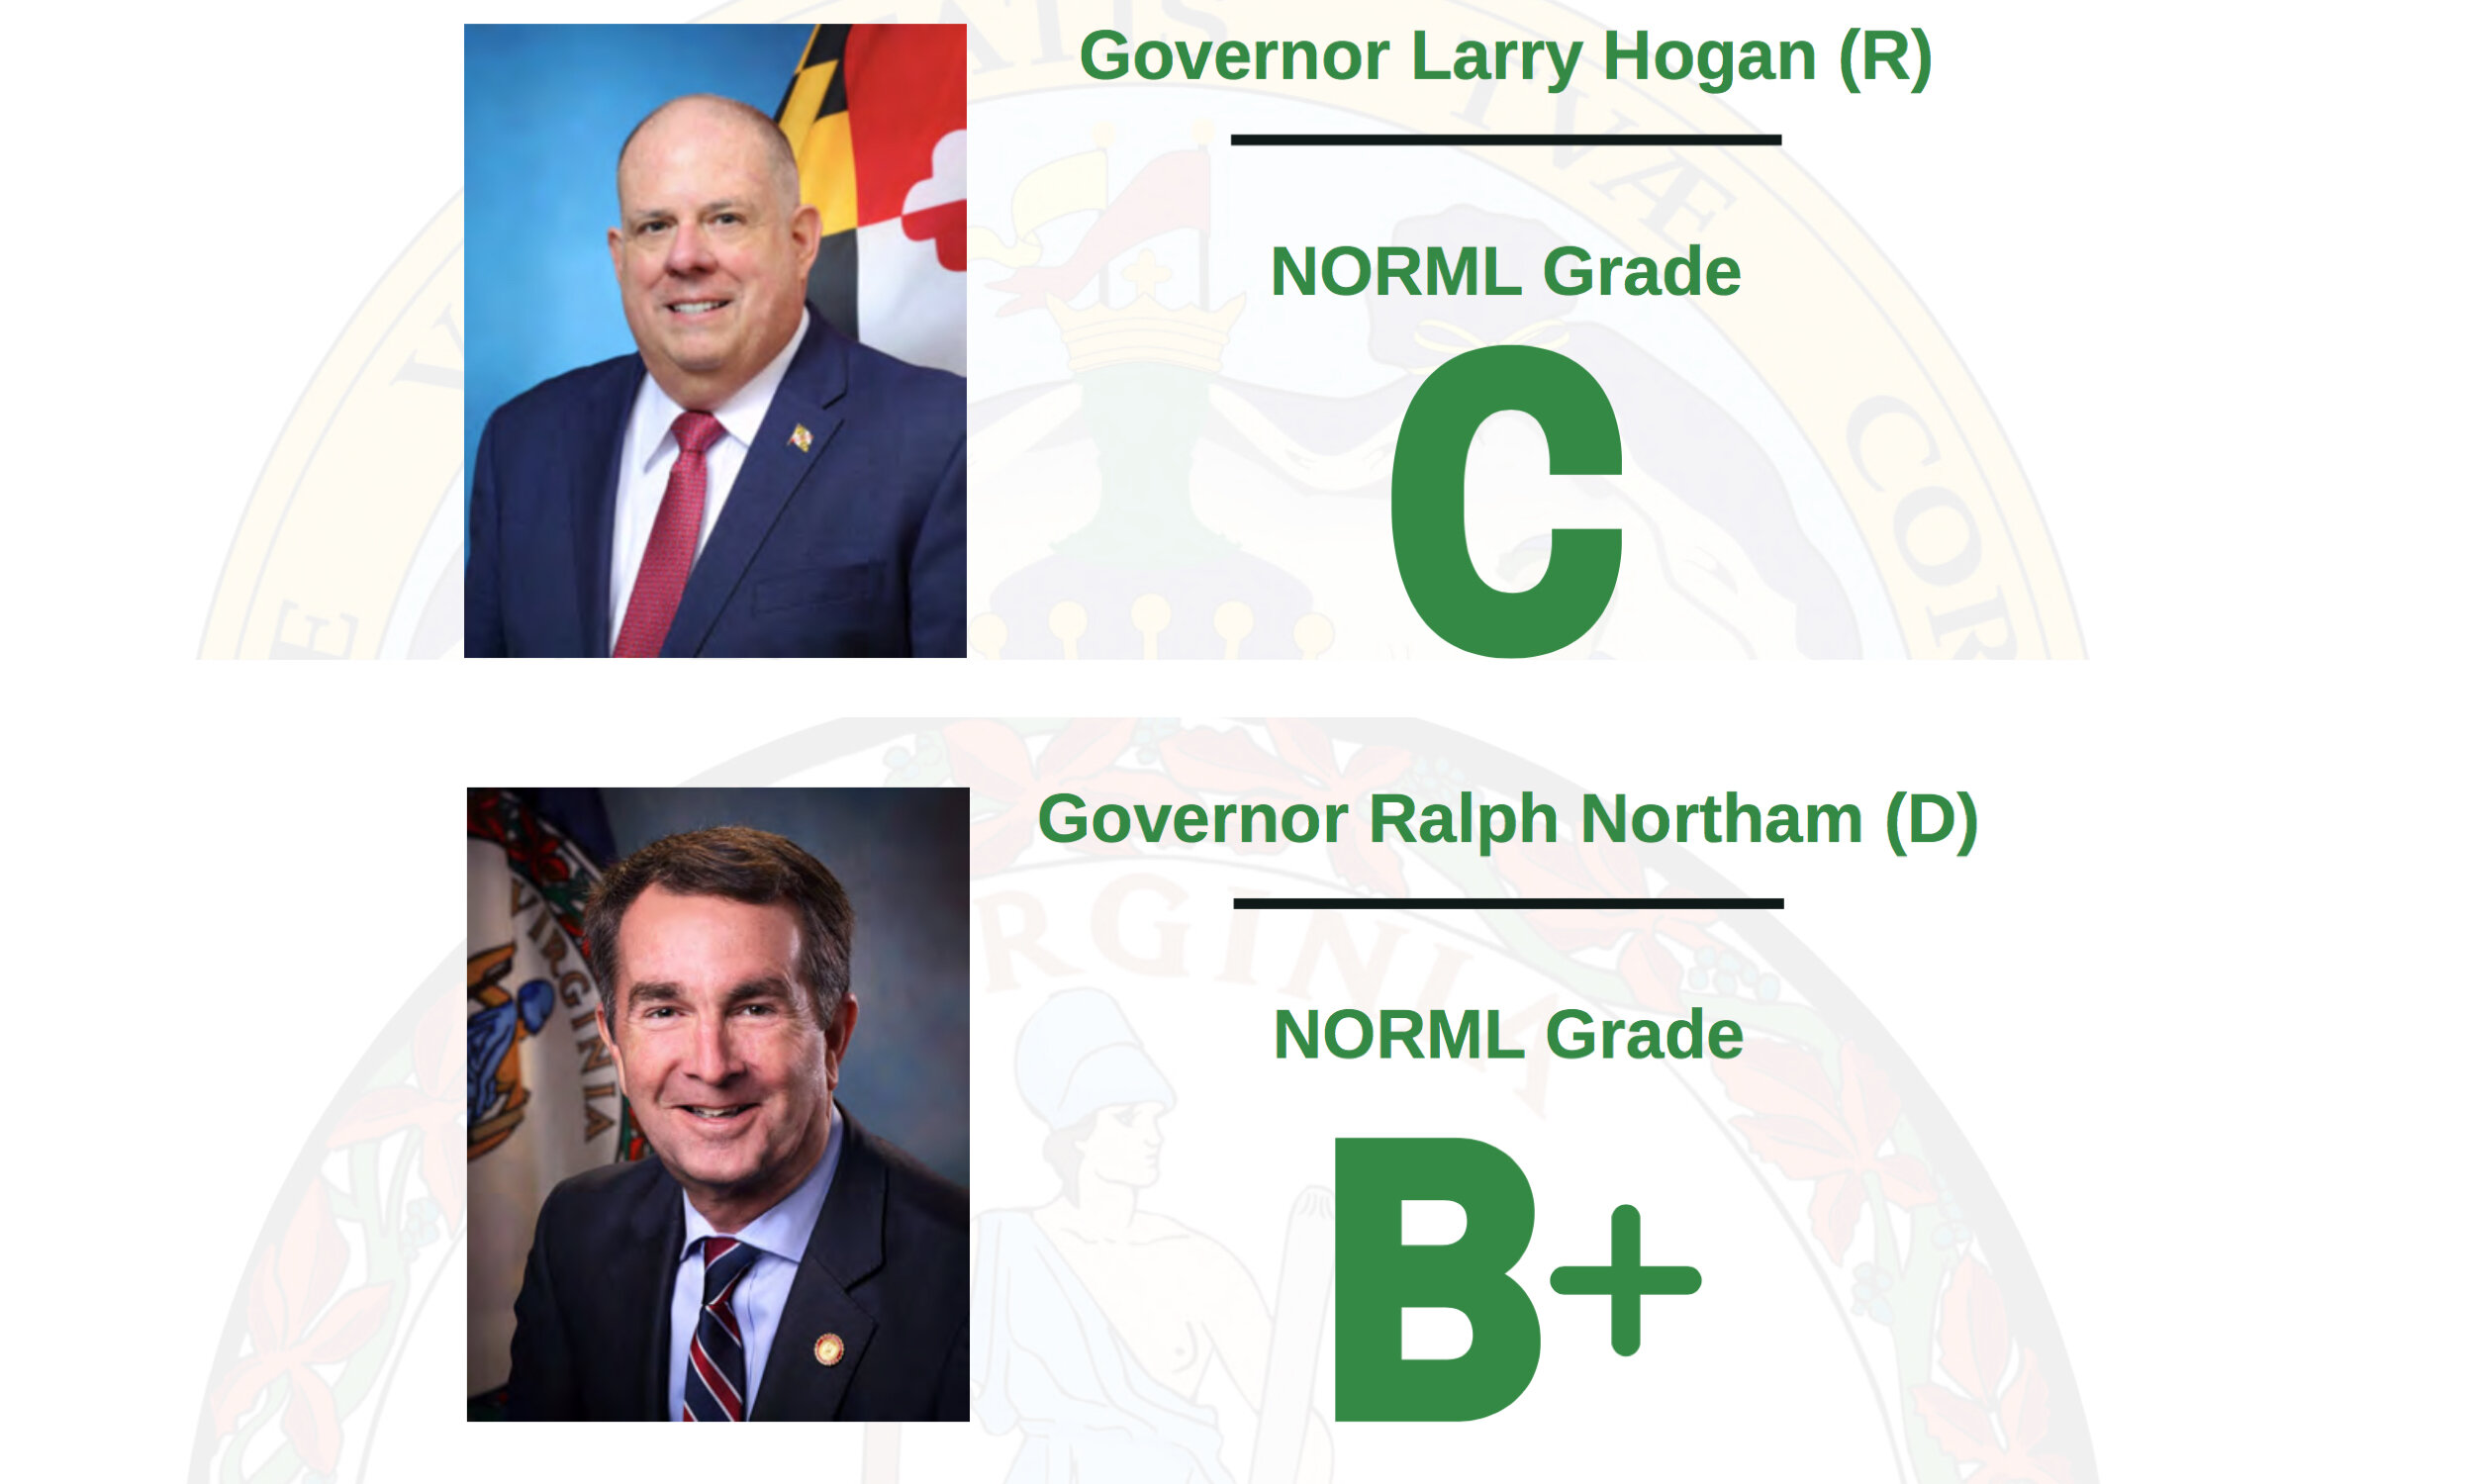 NORML Gives Maryland Governor a ‘C’ and Virginia Governor a ‘B+’